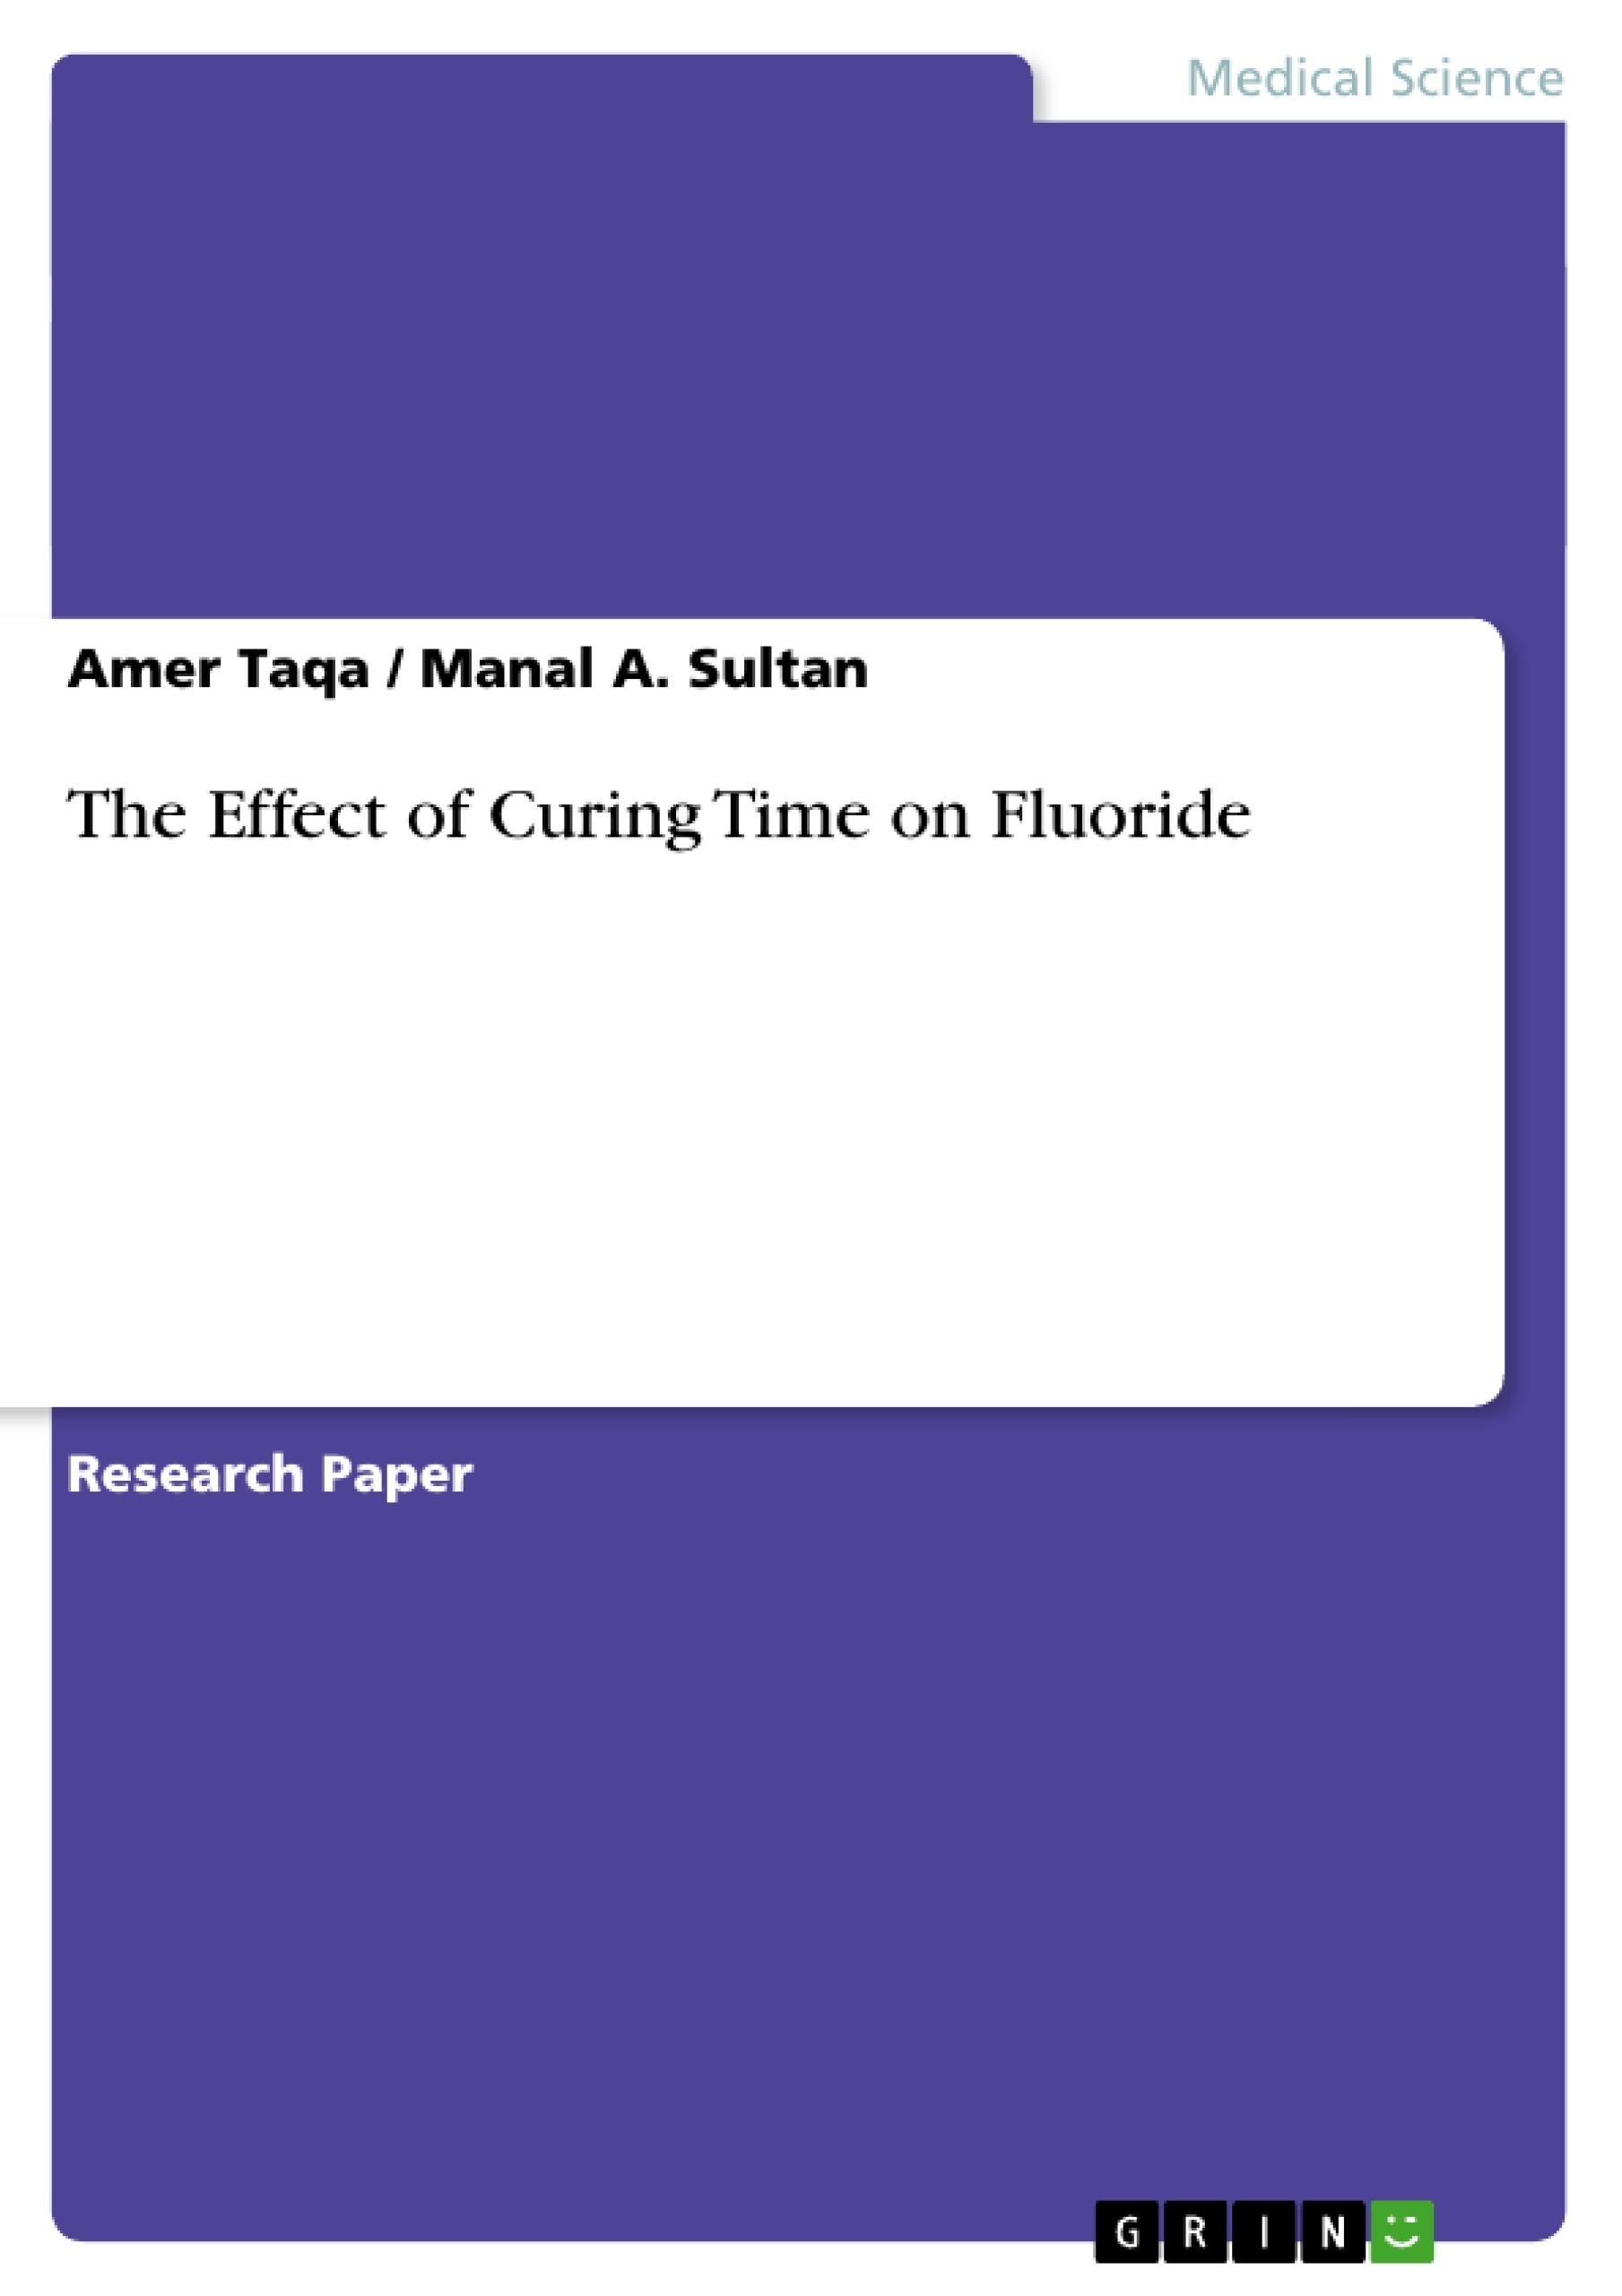 Titel: The Effect of Curing Time on Fluoride